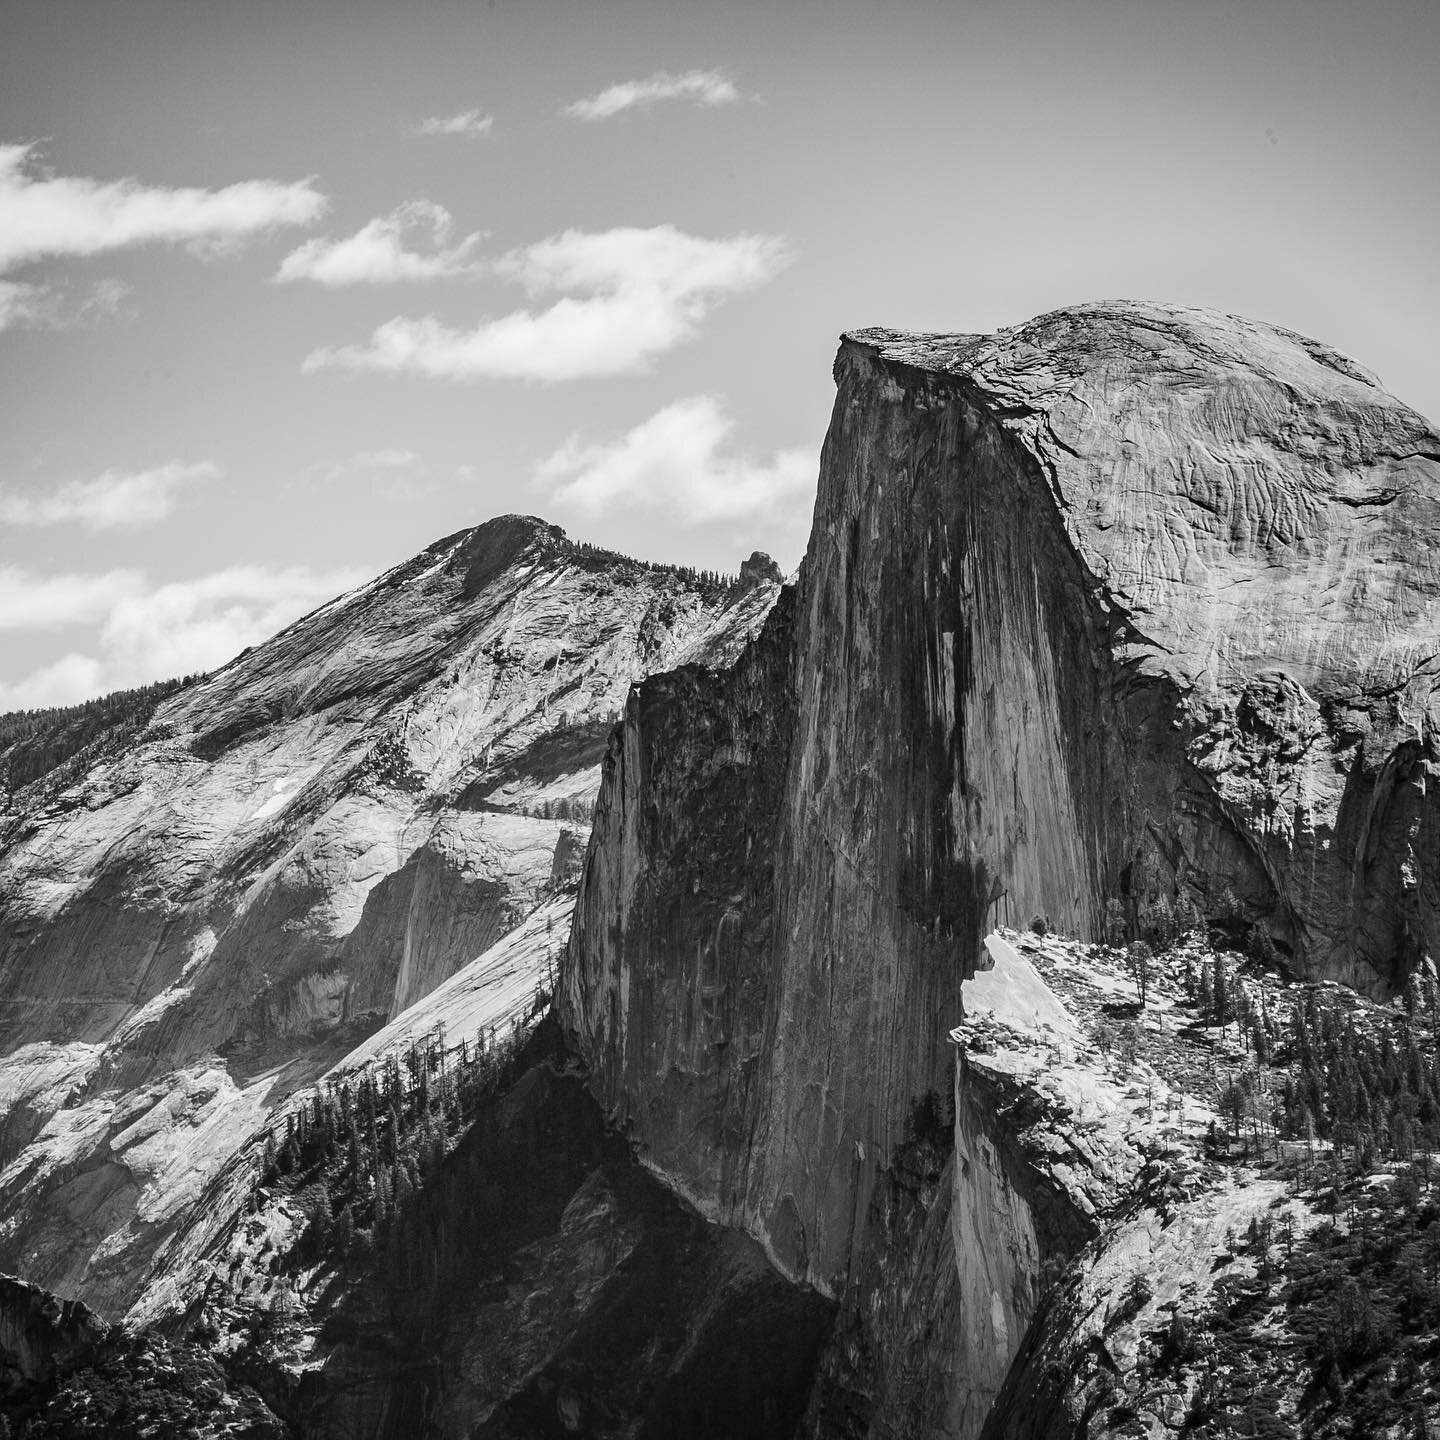 Half Dome &hellip;..Majestic! Says you know who! 😊
.
.
.
#yourshotphotographer #nature #naturephotography #nationalgeographic #nationalpark #nps #nationalparks #canonphotography #canon #blackandwhite #outdoors #hike #view #mountains #landscapephotog